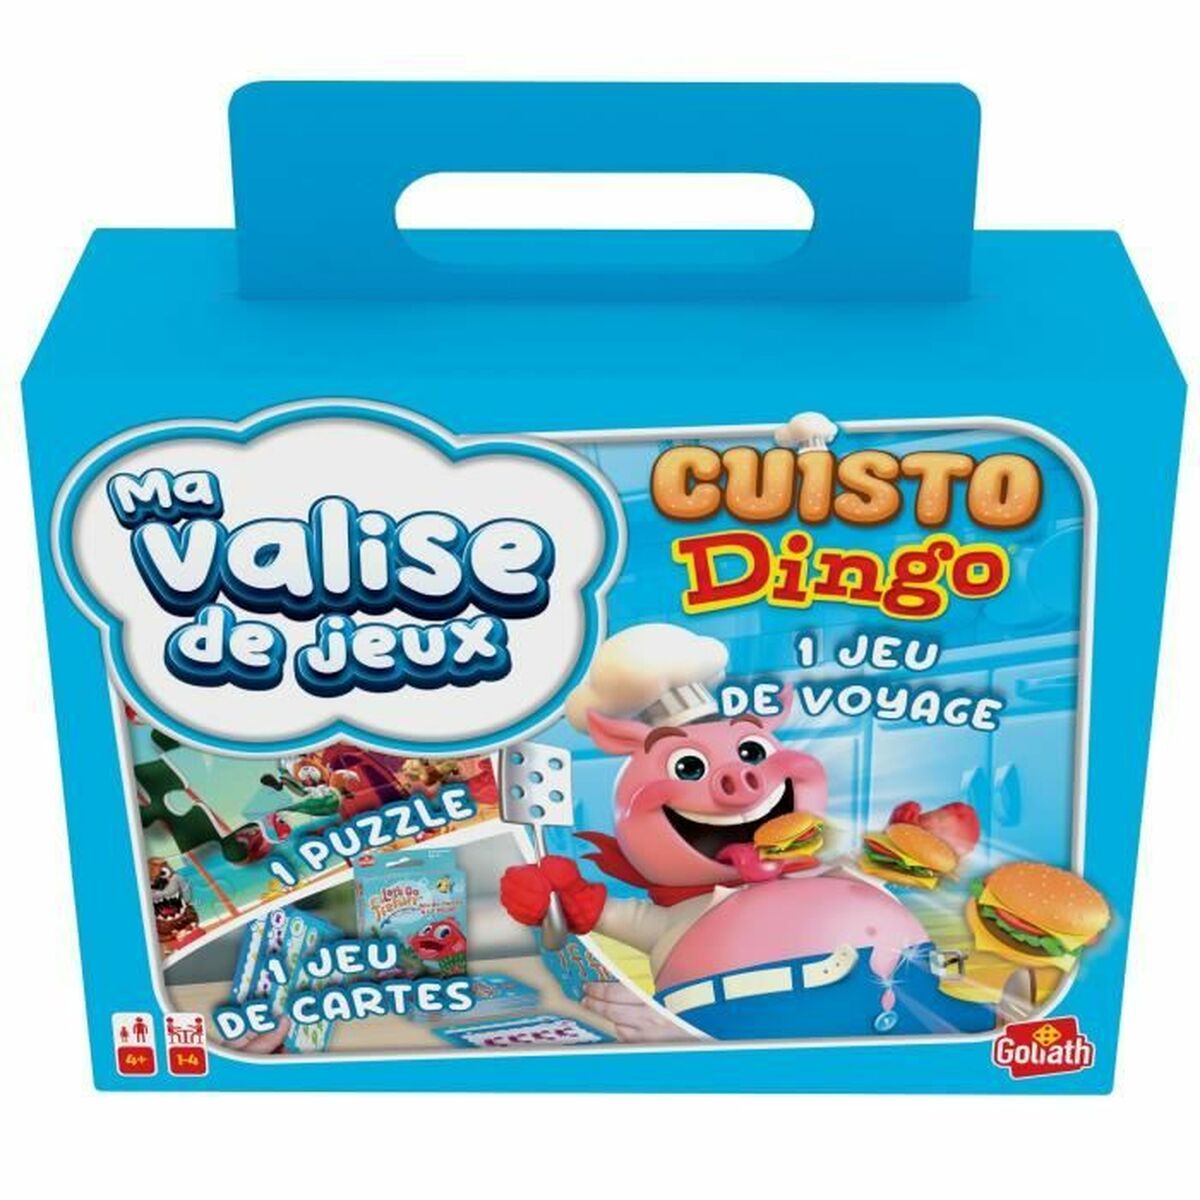 GOLIATH CUISTO DINGO - toys and games inventory, Toys & games, Official  archives of Merkandi